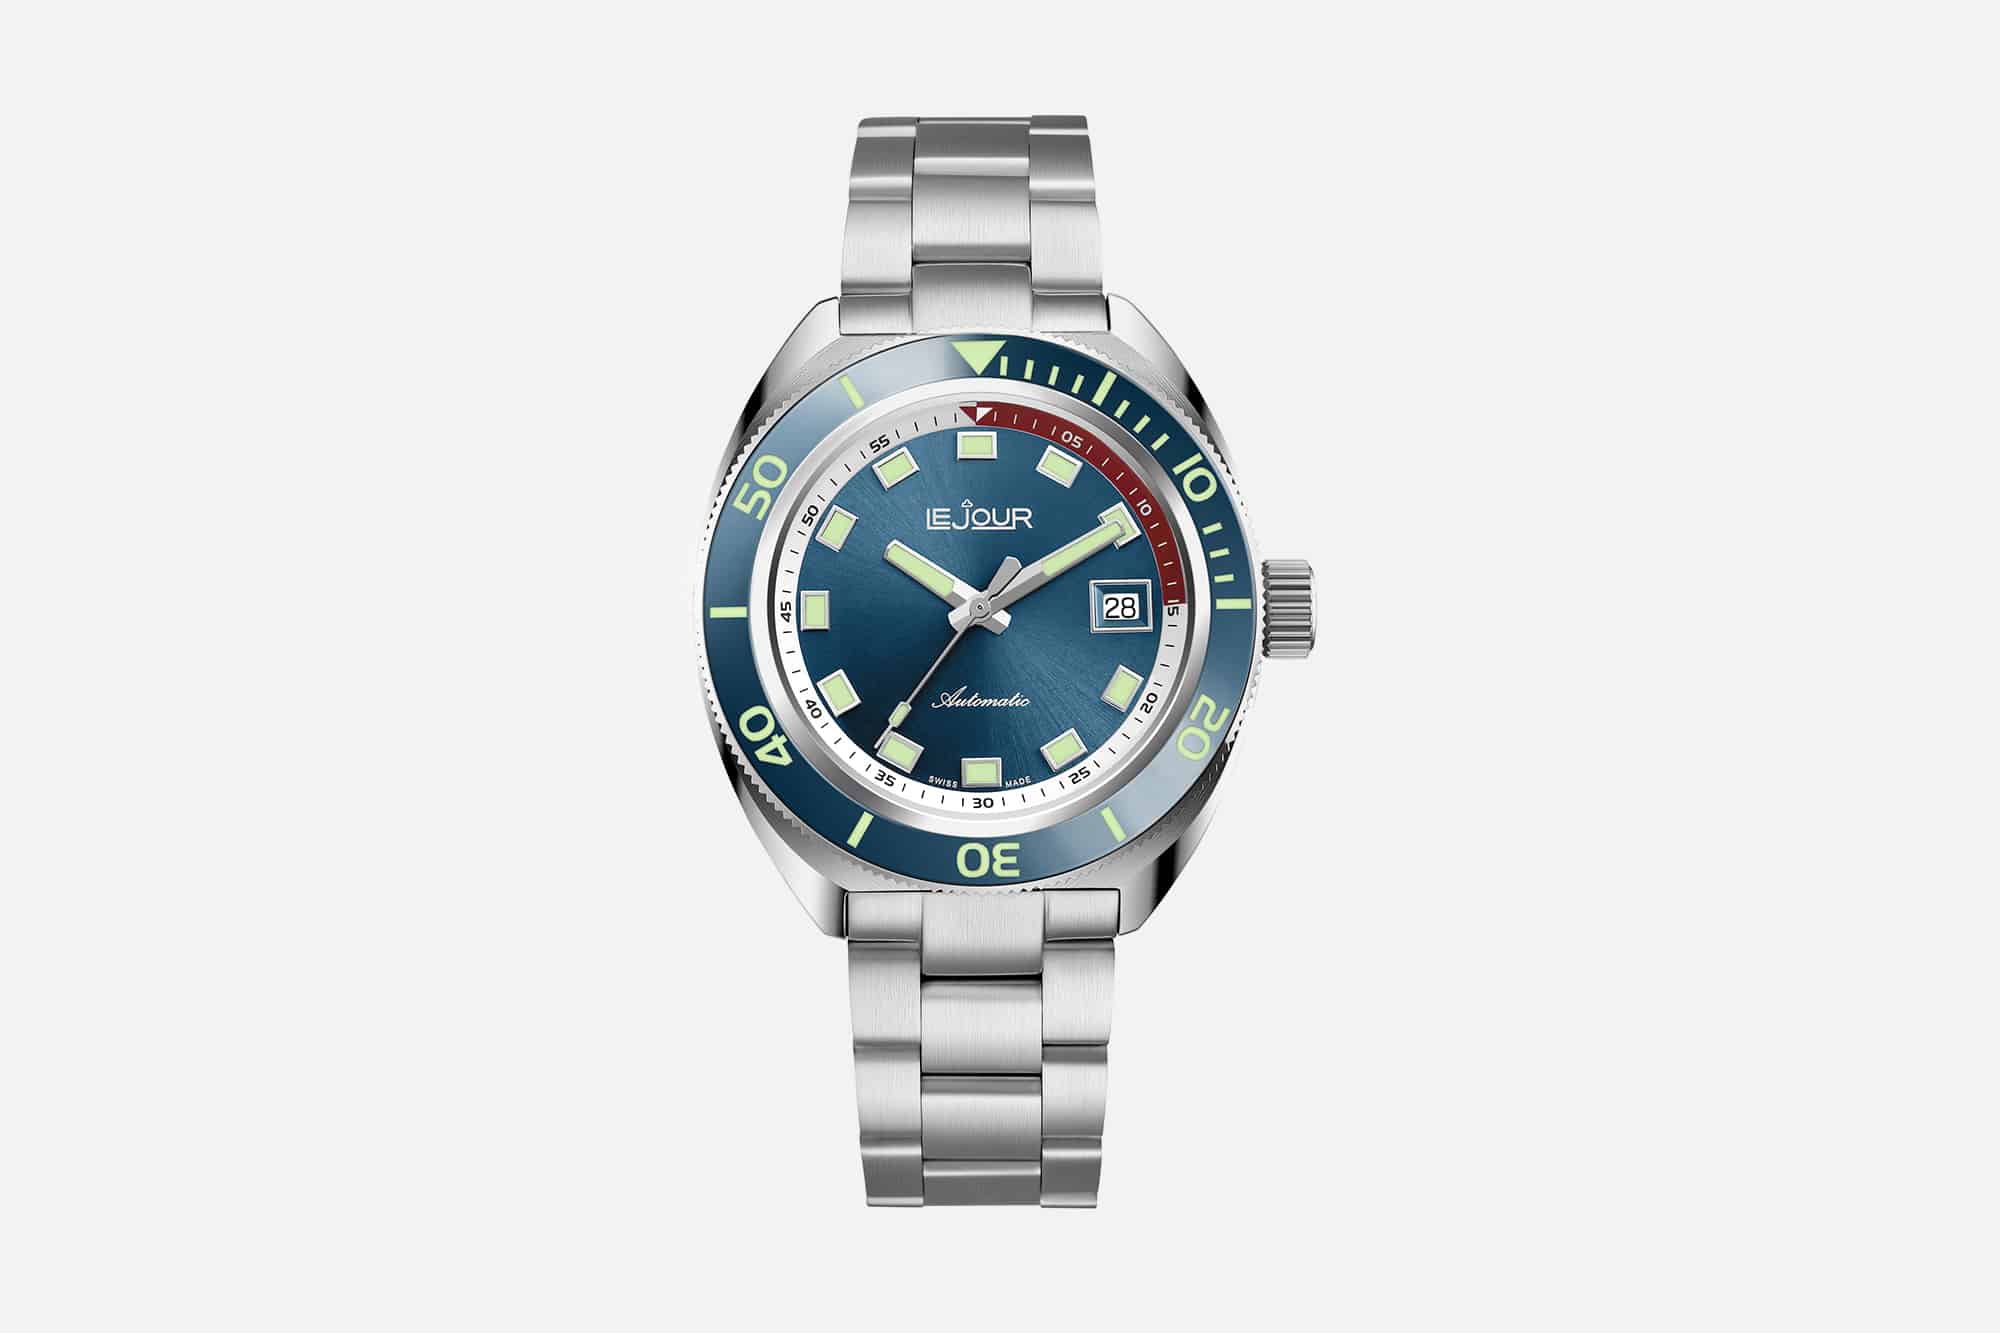 Le Jour Takes You Back to the 1970s with the New Hammerhead Diver